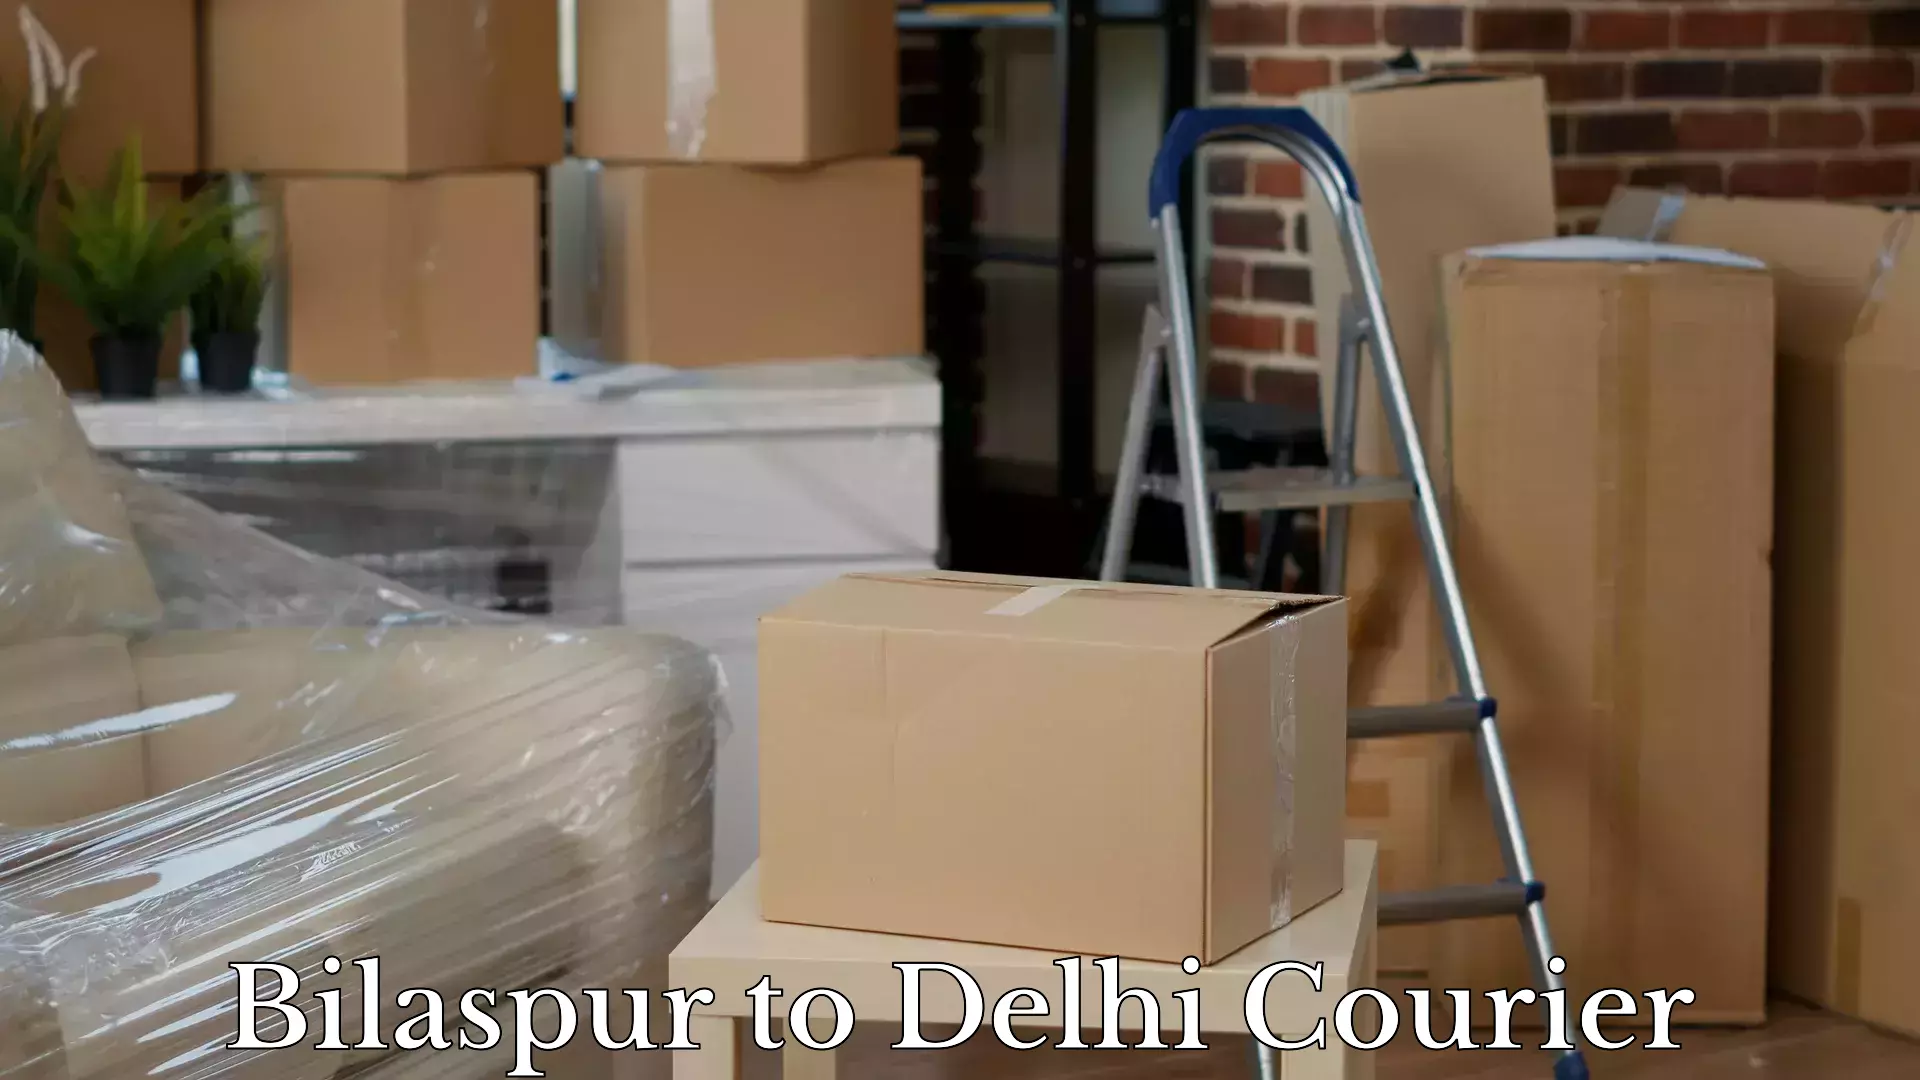 Doorstep luggage collection Bilaspur to NCR